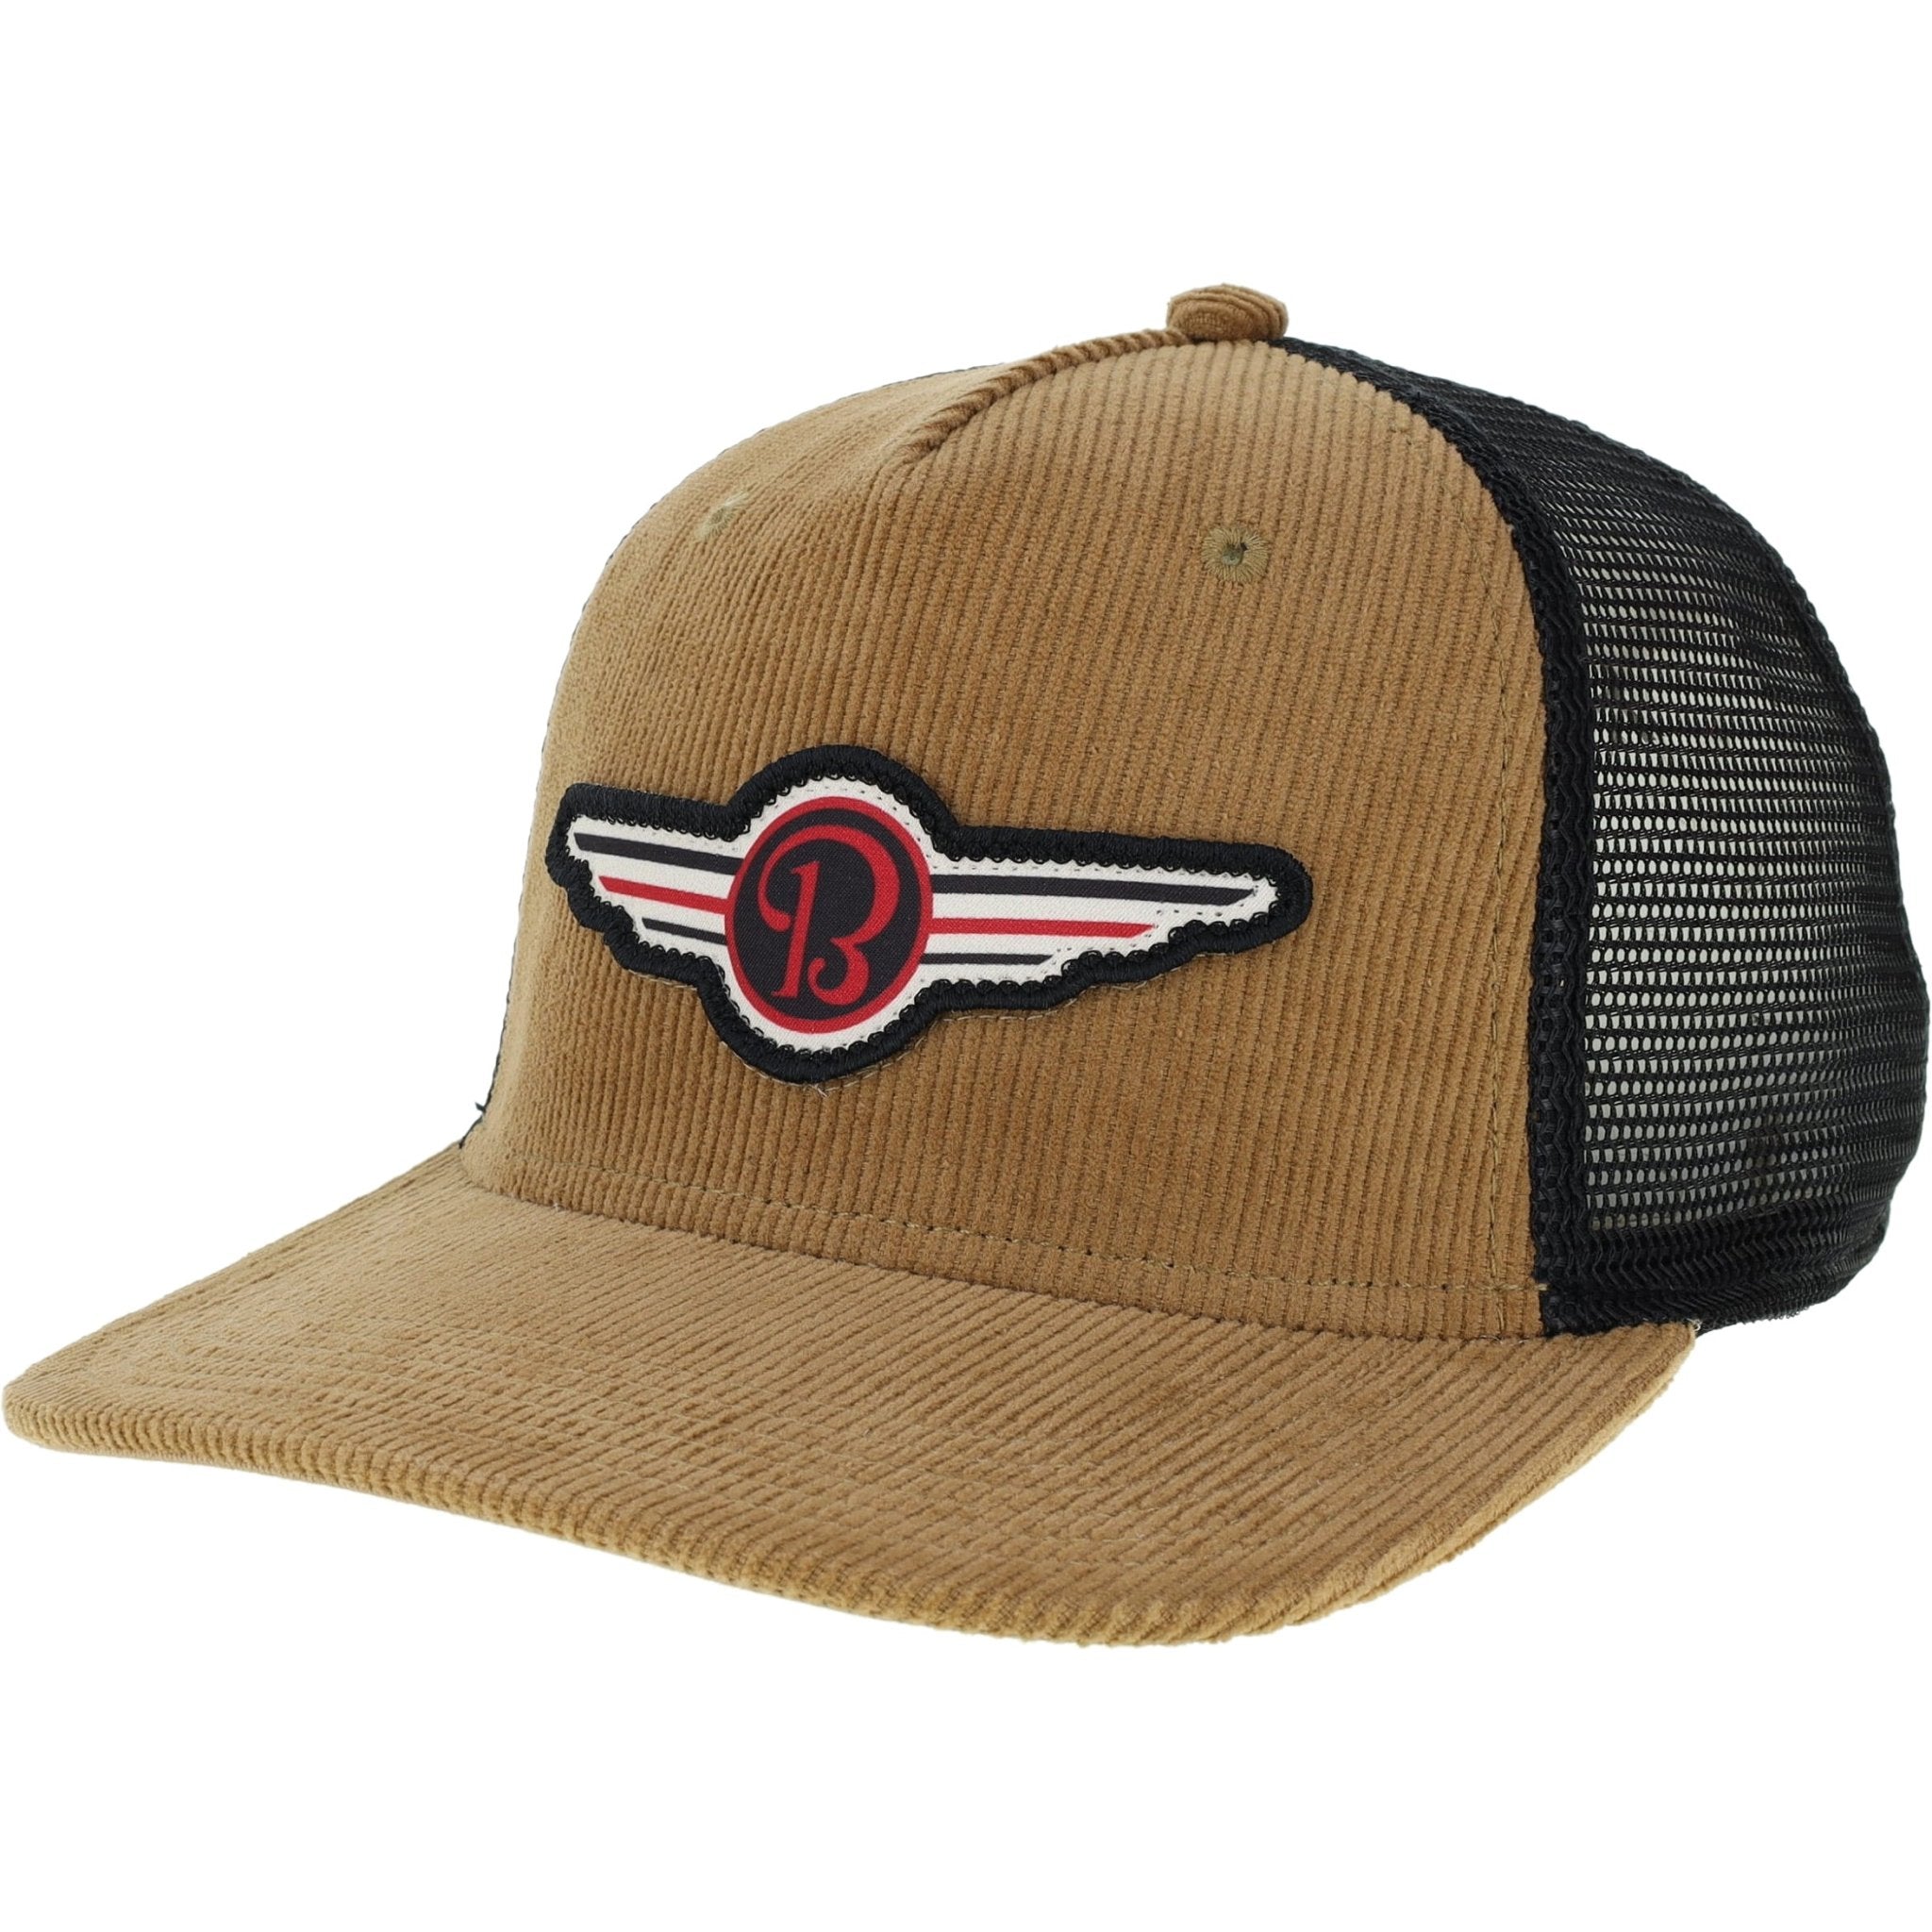 Beechcraft Wings Patch Officially Licensed Ball Cap